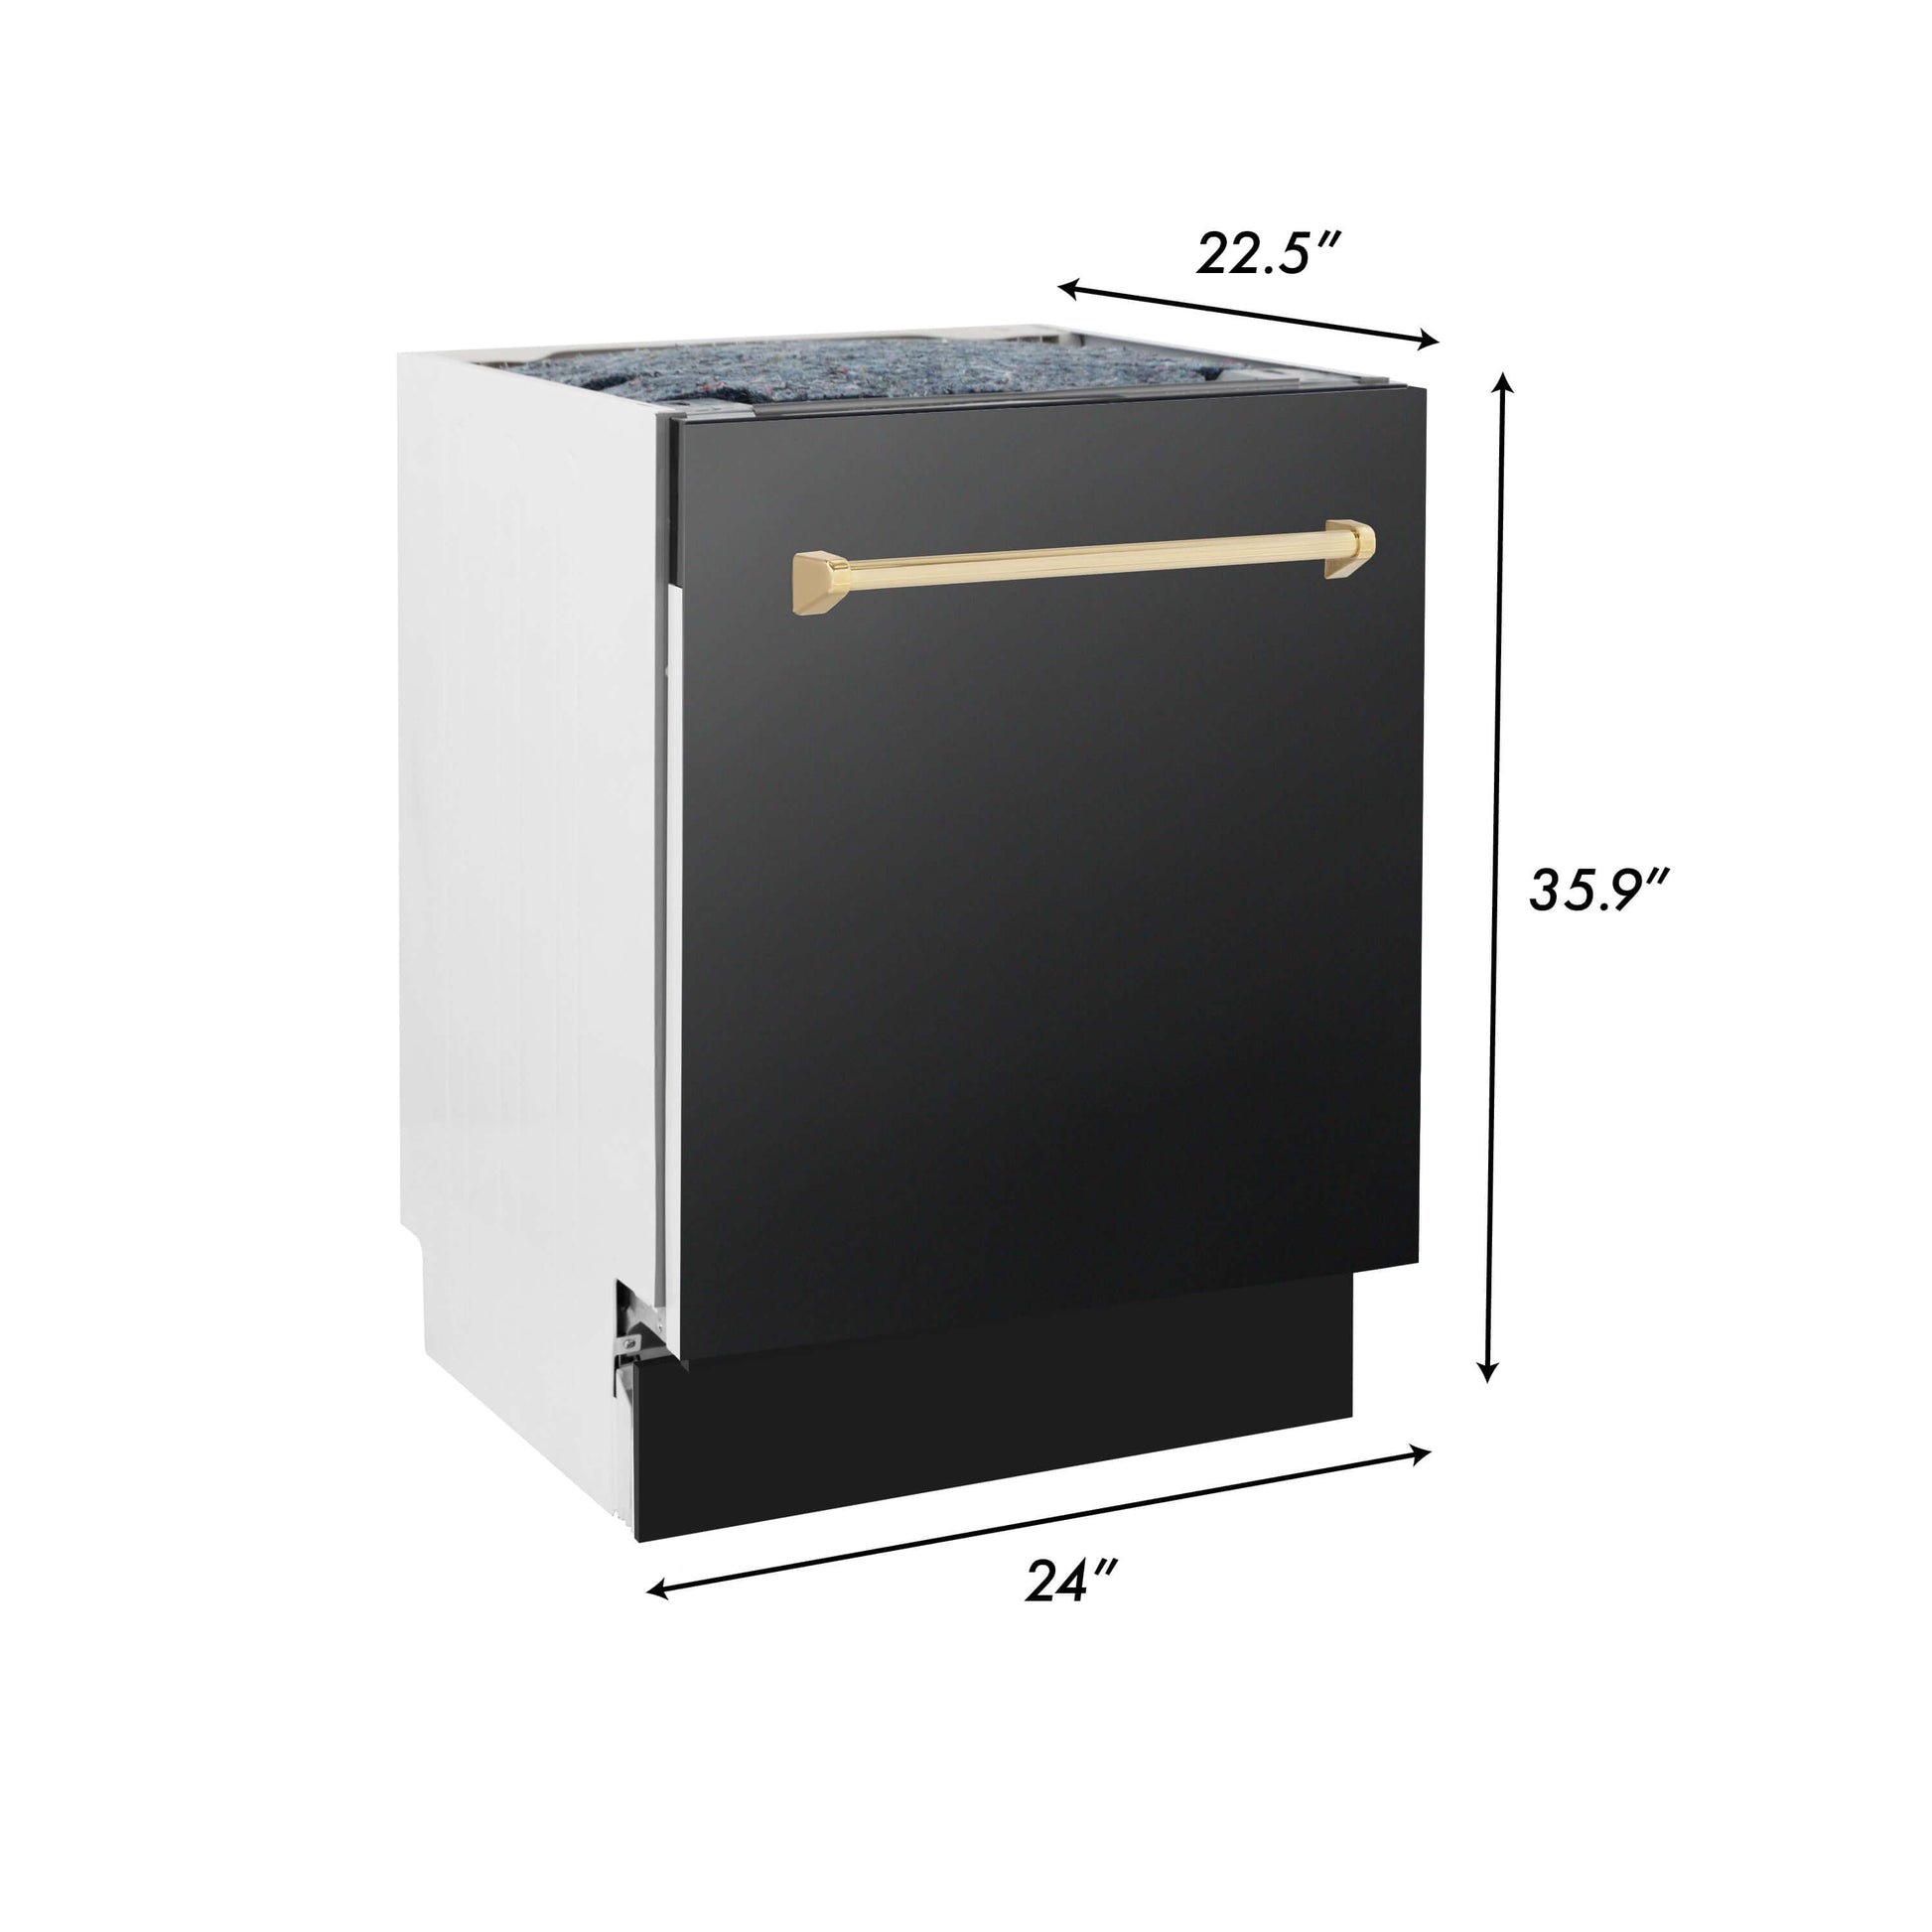 ZLINE 4-Appliance 48" Autograph Edition Kitchen Package with Black Stainless Steel Dual Fuel Range, Range Hood, Dishwasher, and Refrigeration Including External Water Dispenser with Polished Gold Accents